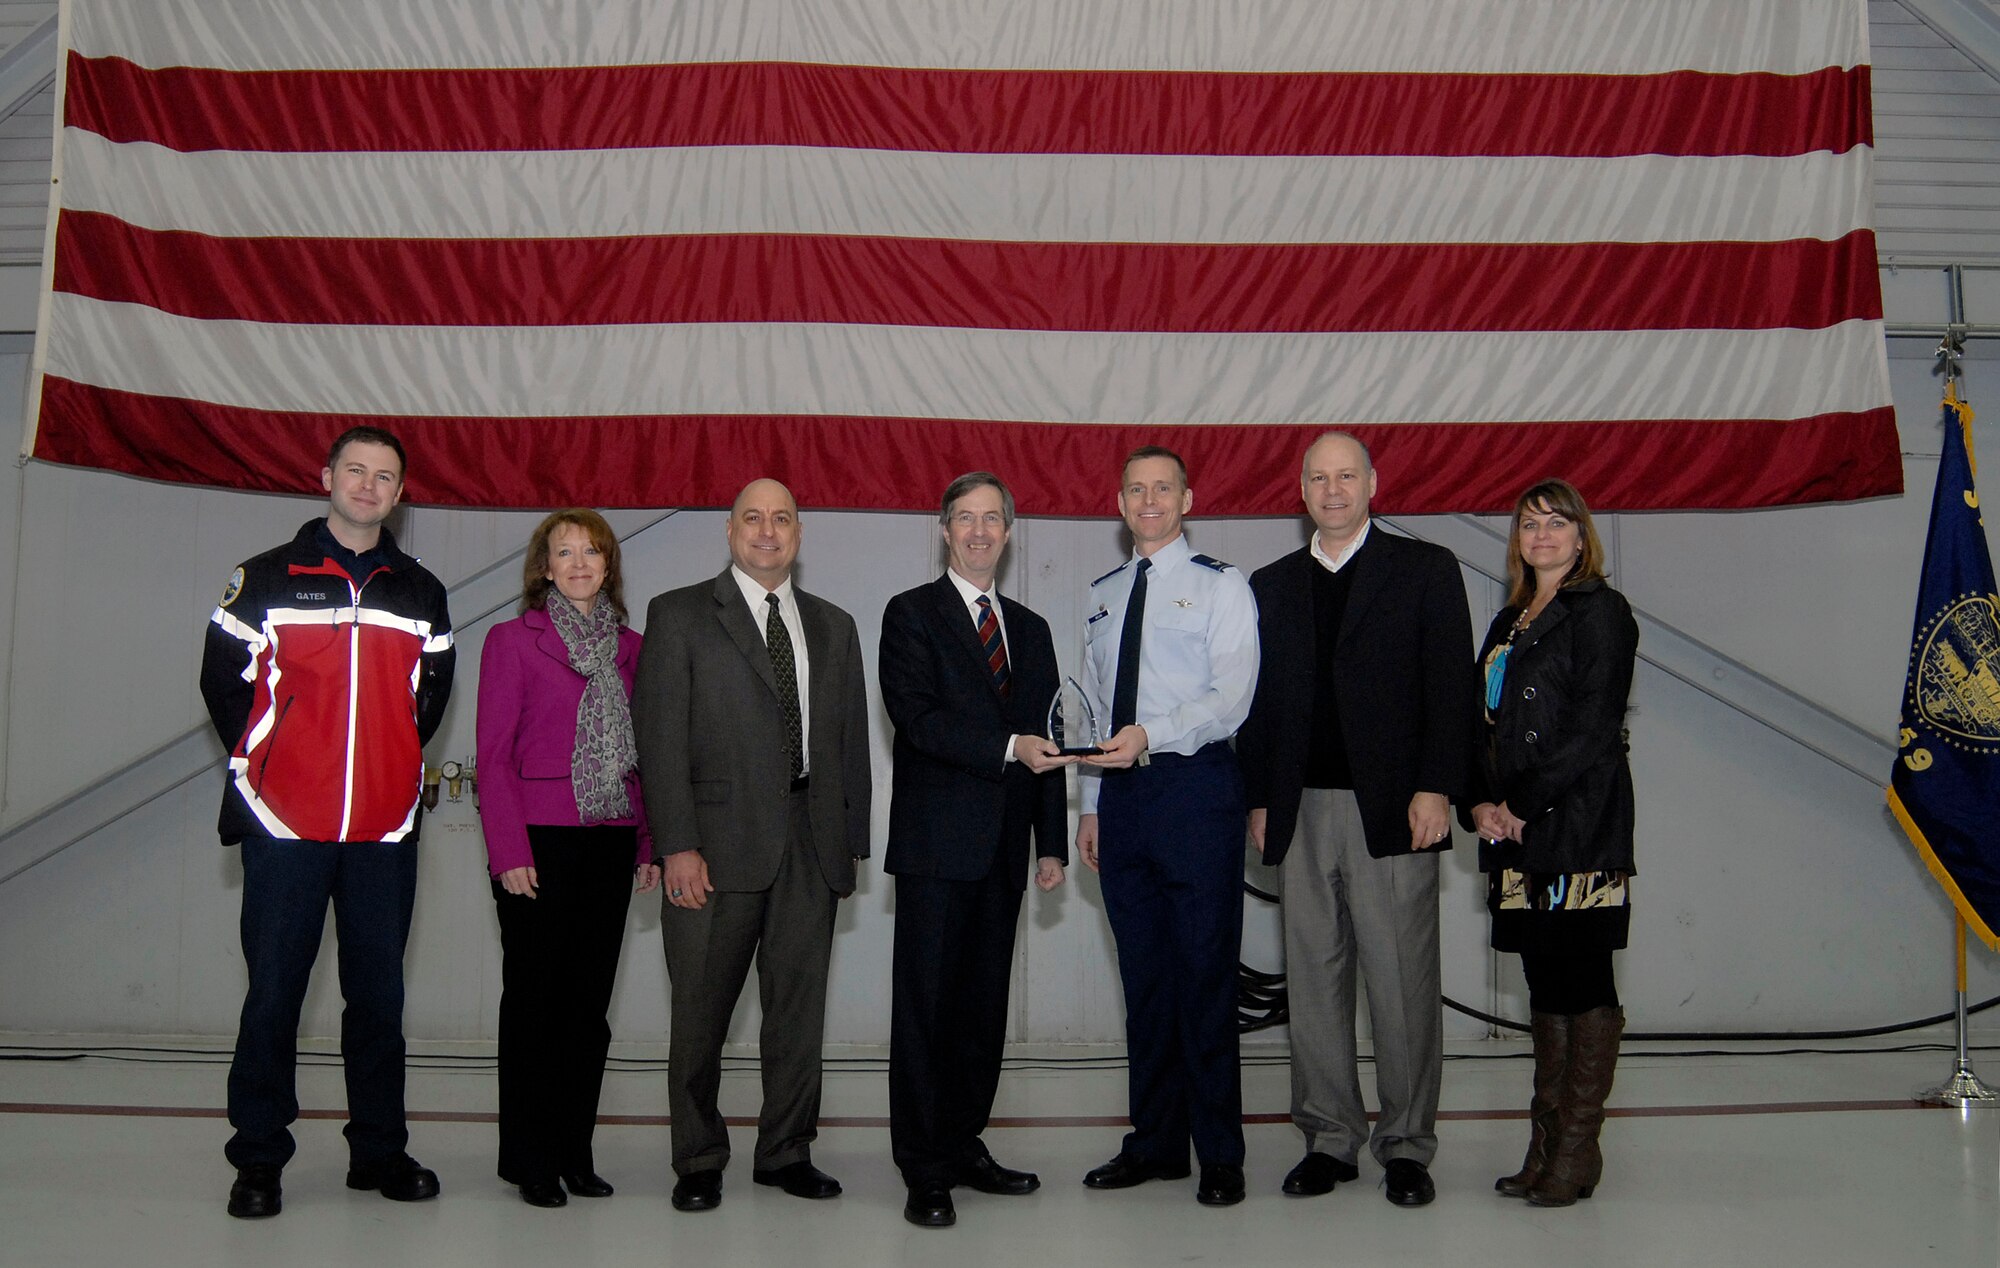 Standing with staff members of the Portland of Portland, Col. Rick Wedan, 142nd Fighter Wing Commander, and Bill Wyatt Executive Director for the Port of Portland, hold the award for the Oregon Air National Guard Employer of the Year award for 2013 during a ceremony at the Portland Air National Guard Base, Ore., Feb., 2014. (Air National Guard photo by Tech. Sgt. John Hughel, 142nd Fighter Wing Public Affairs/Released)